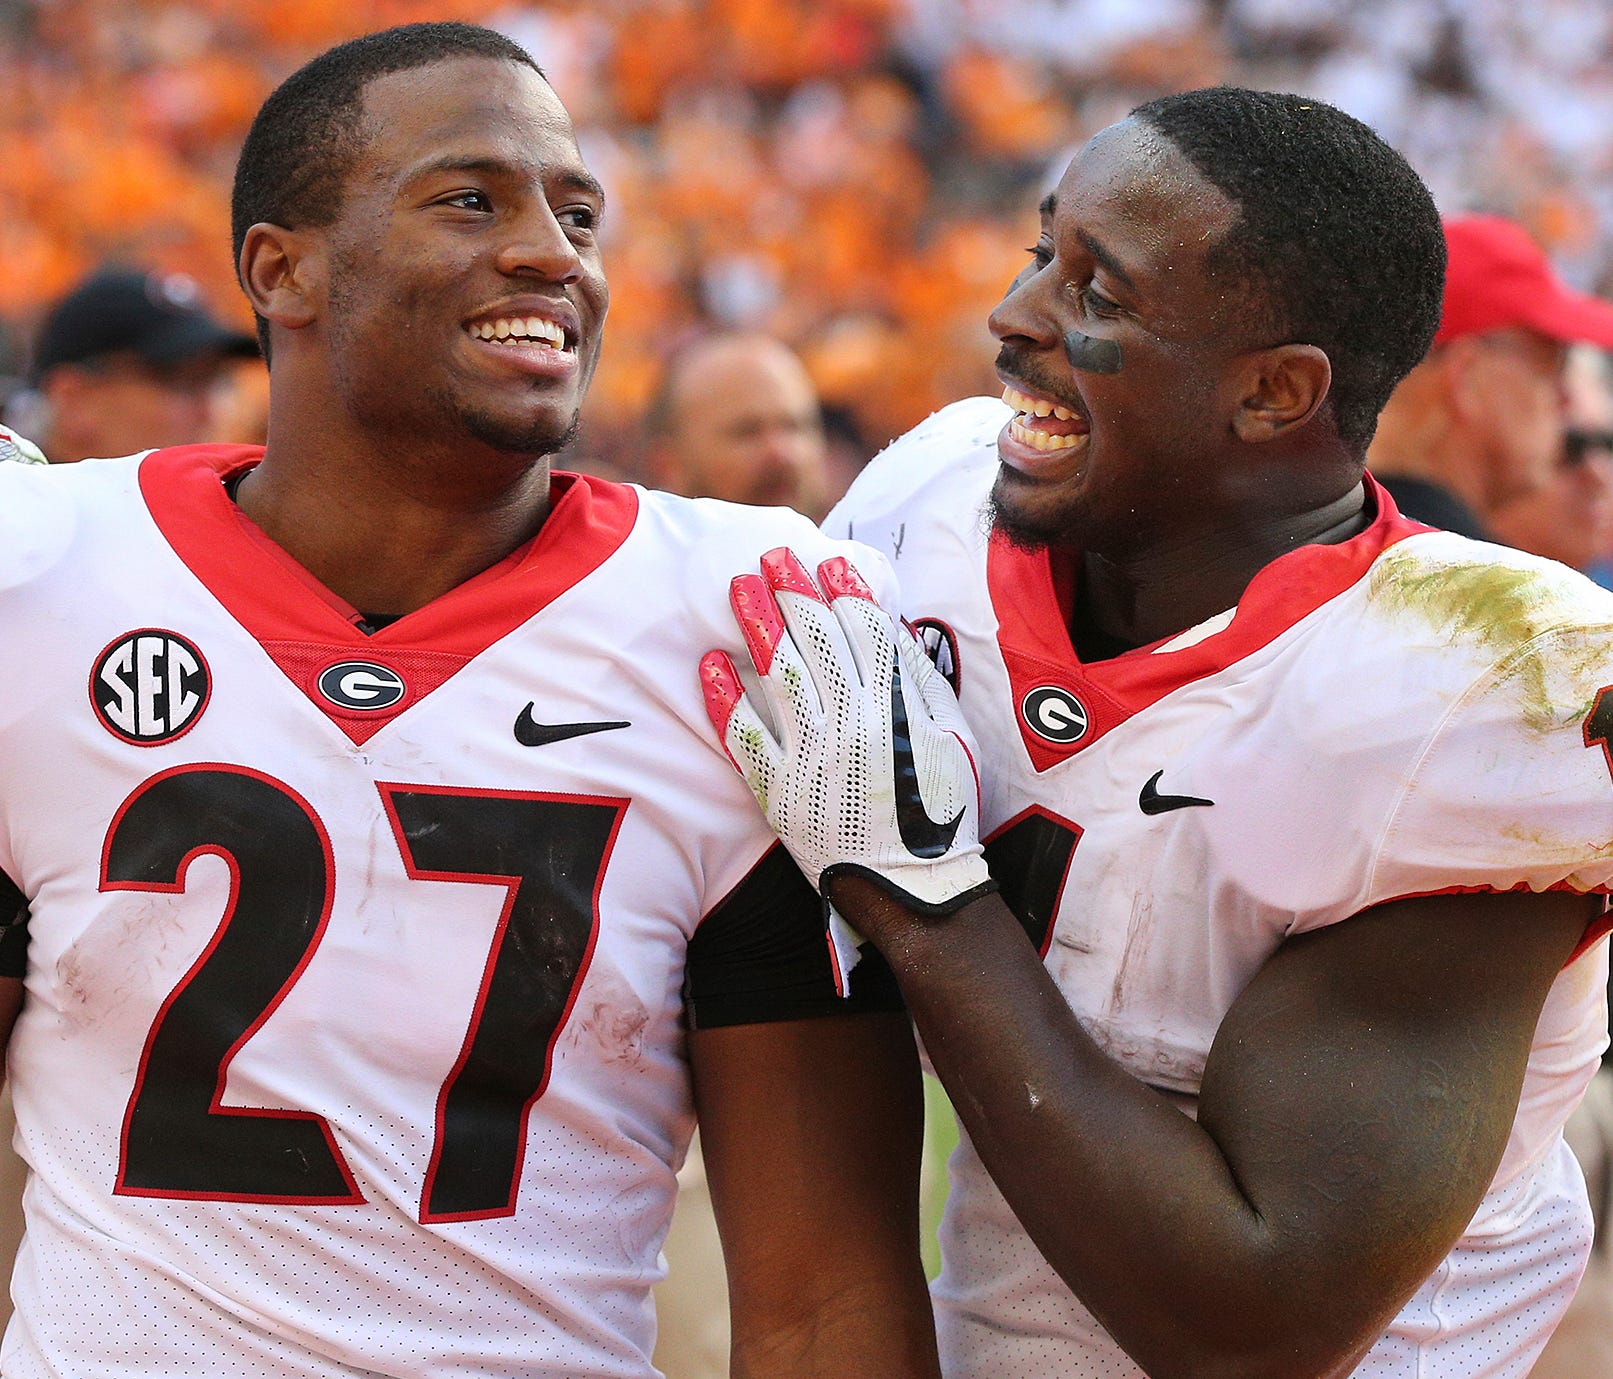 Former Georgia RBs Nick Chubb (27) and Sony Michel were a record-breaking duo in college.